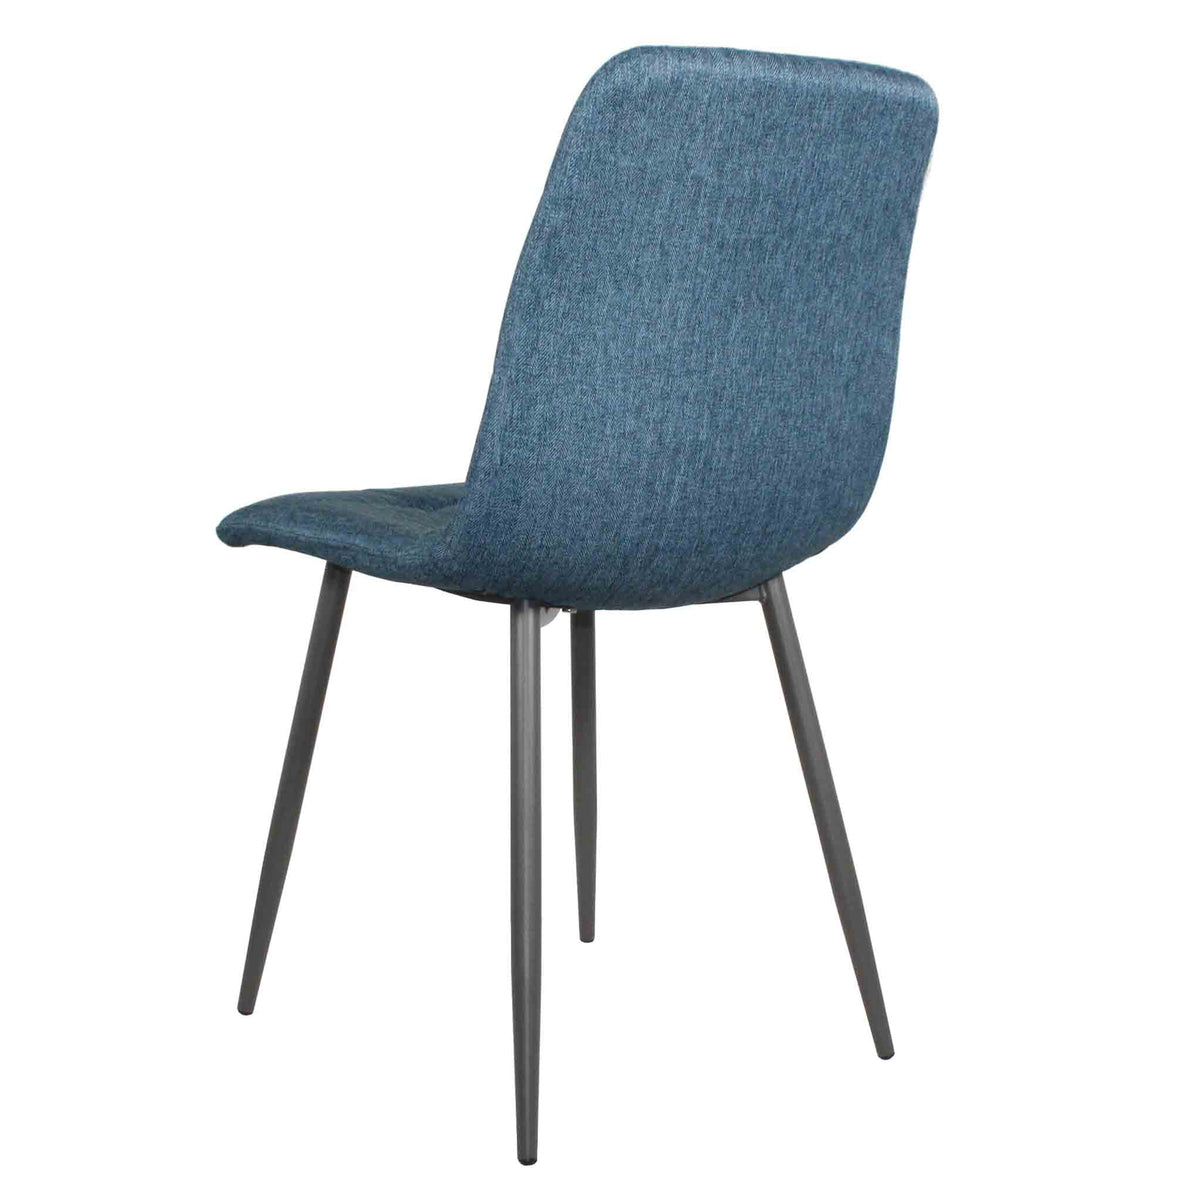 Back view of Olivia Blue Faux Leather Padded Dining Chairs